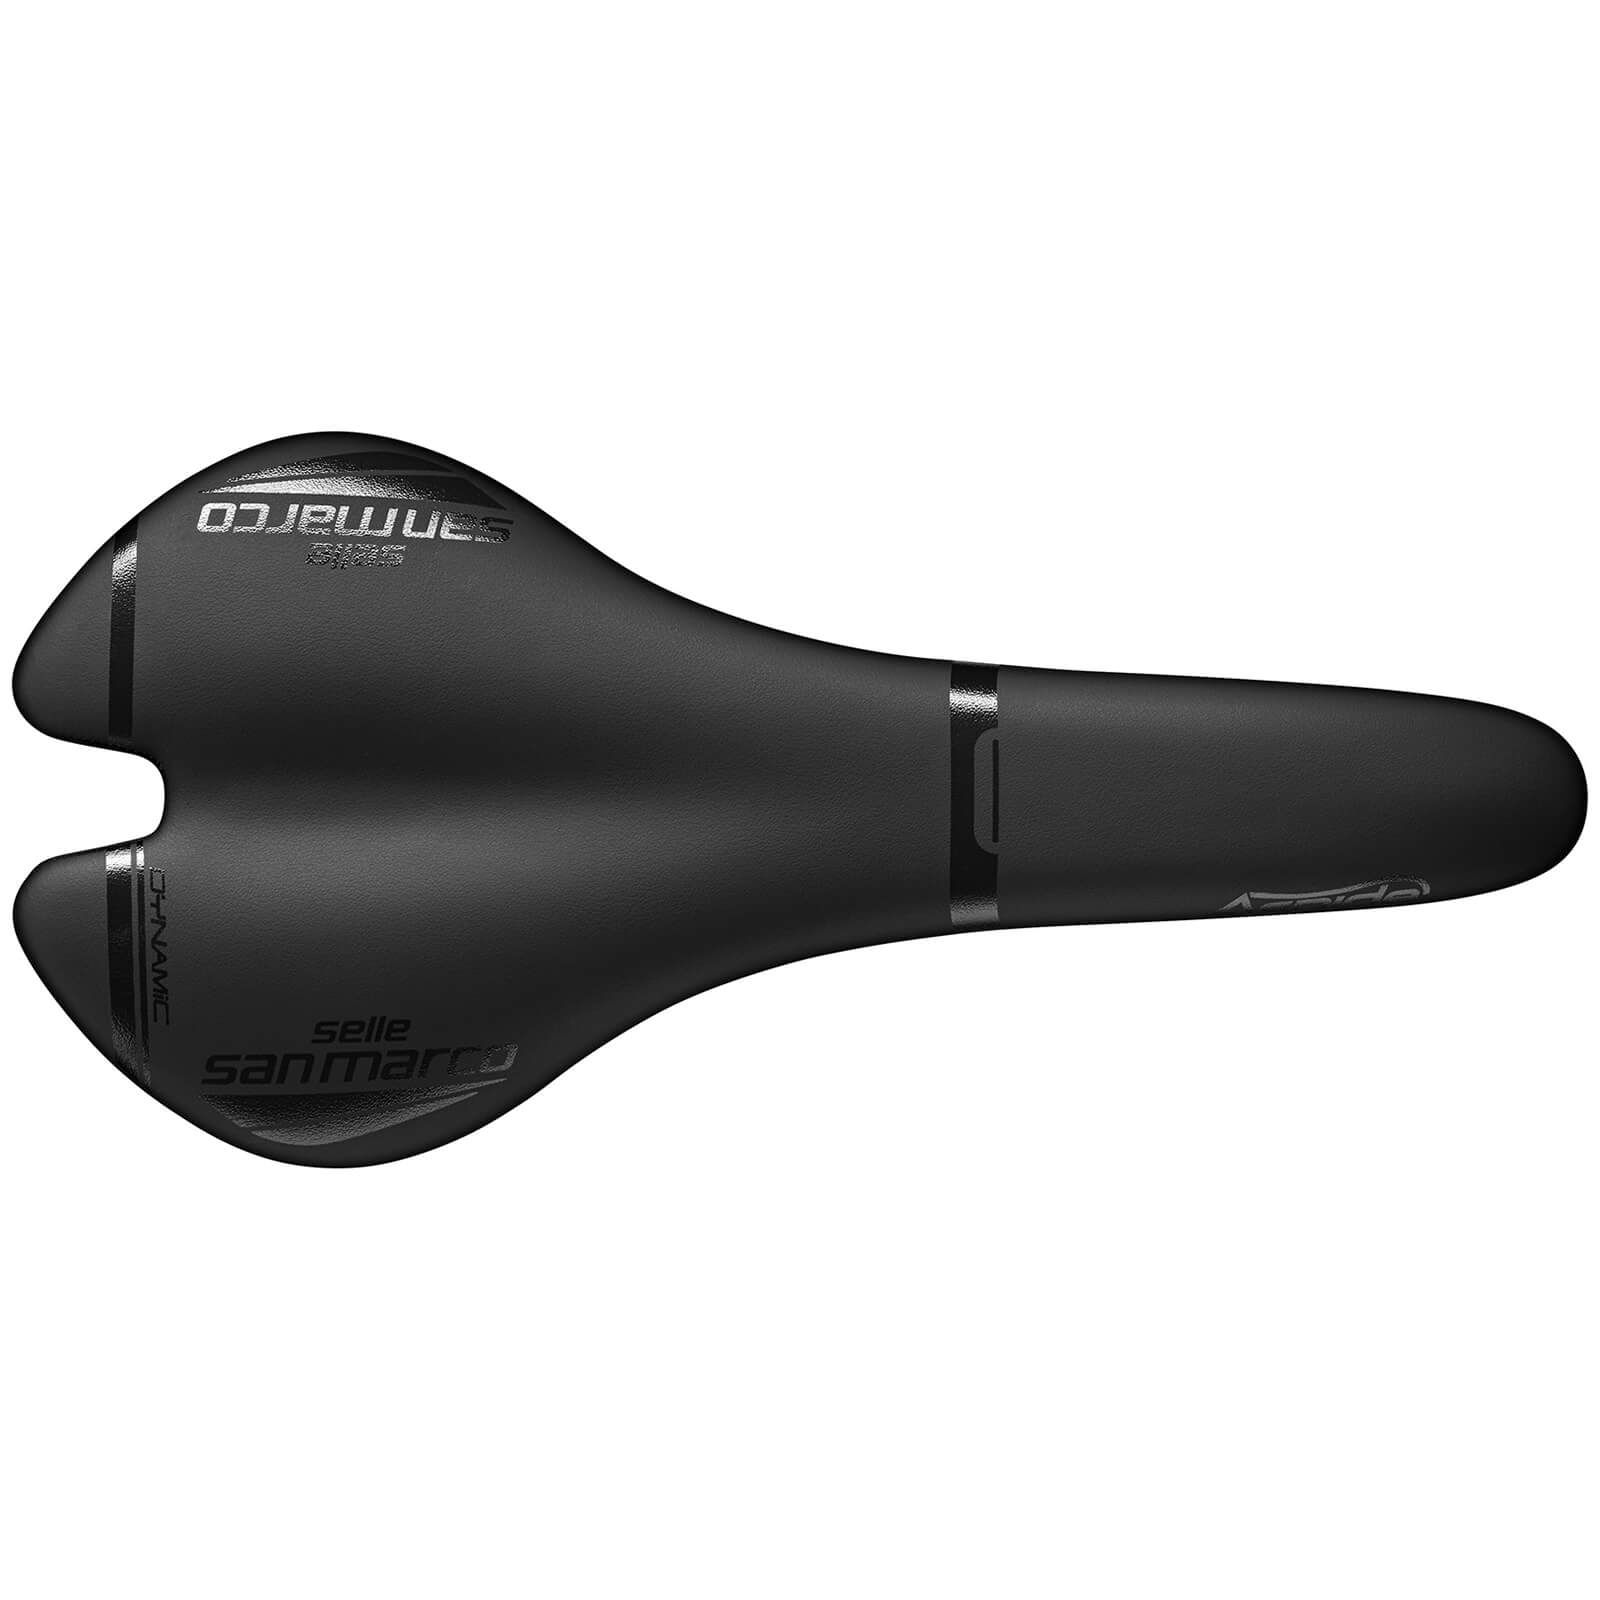 Selle San Marco Aspide Full-Fit Dynamic Saddle - Narrow - S1